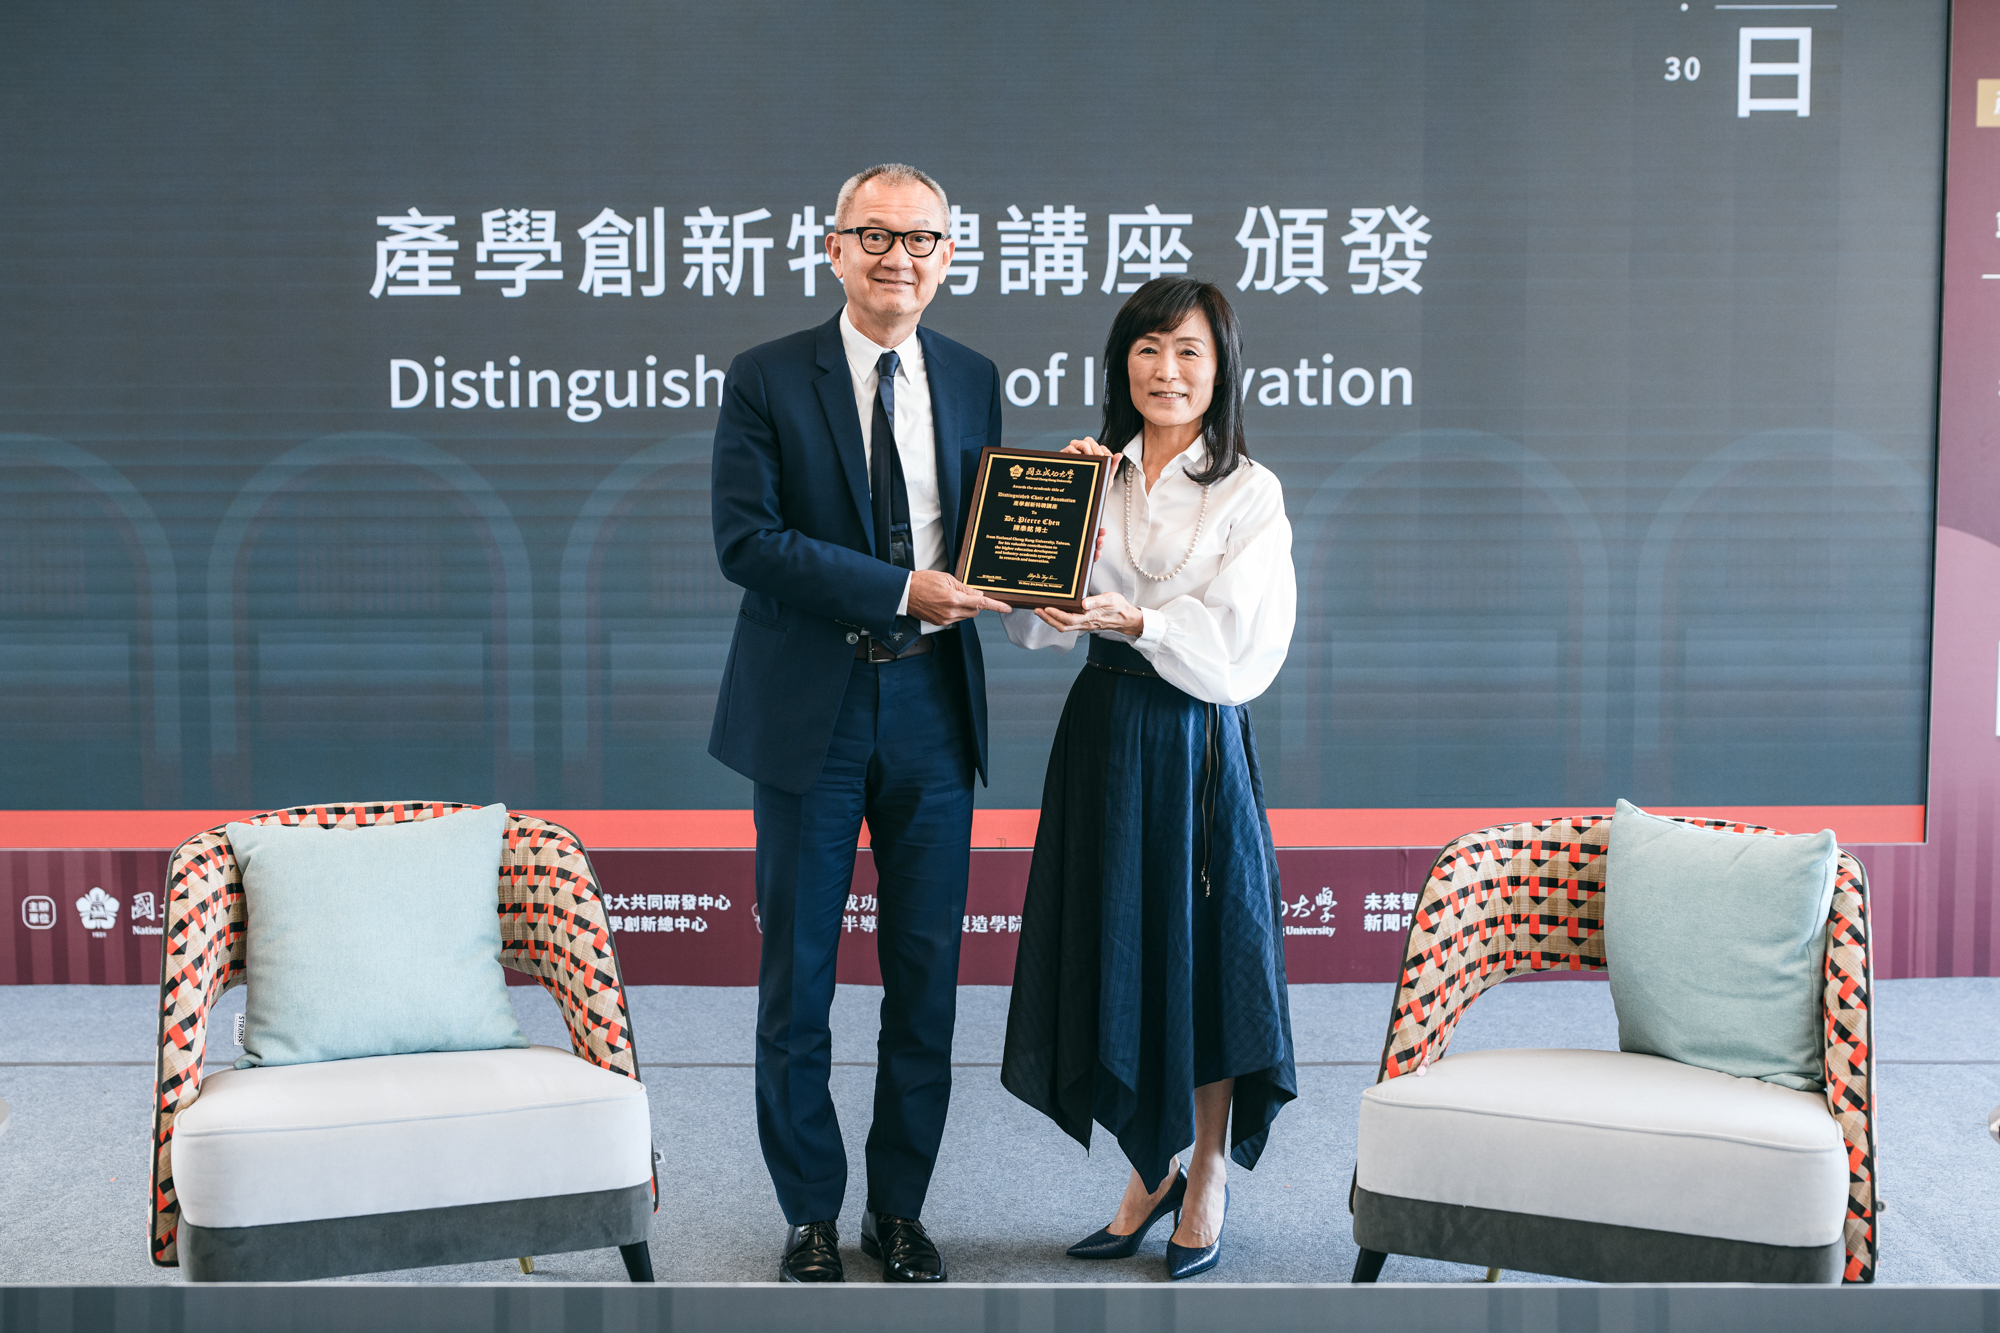 Huey-Jen Su commemorated Pierre Chen as the Distinguished Chair of Innovation 